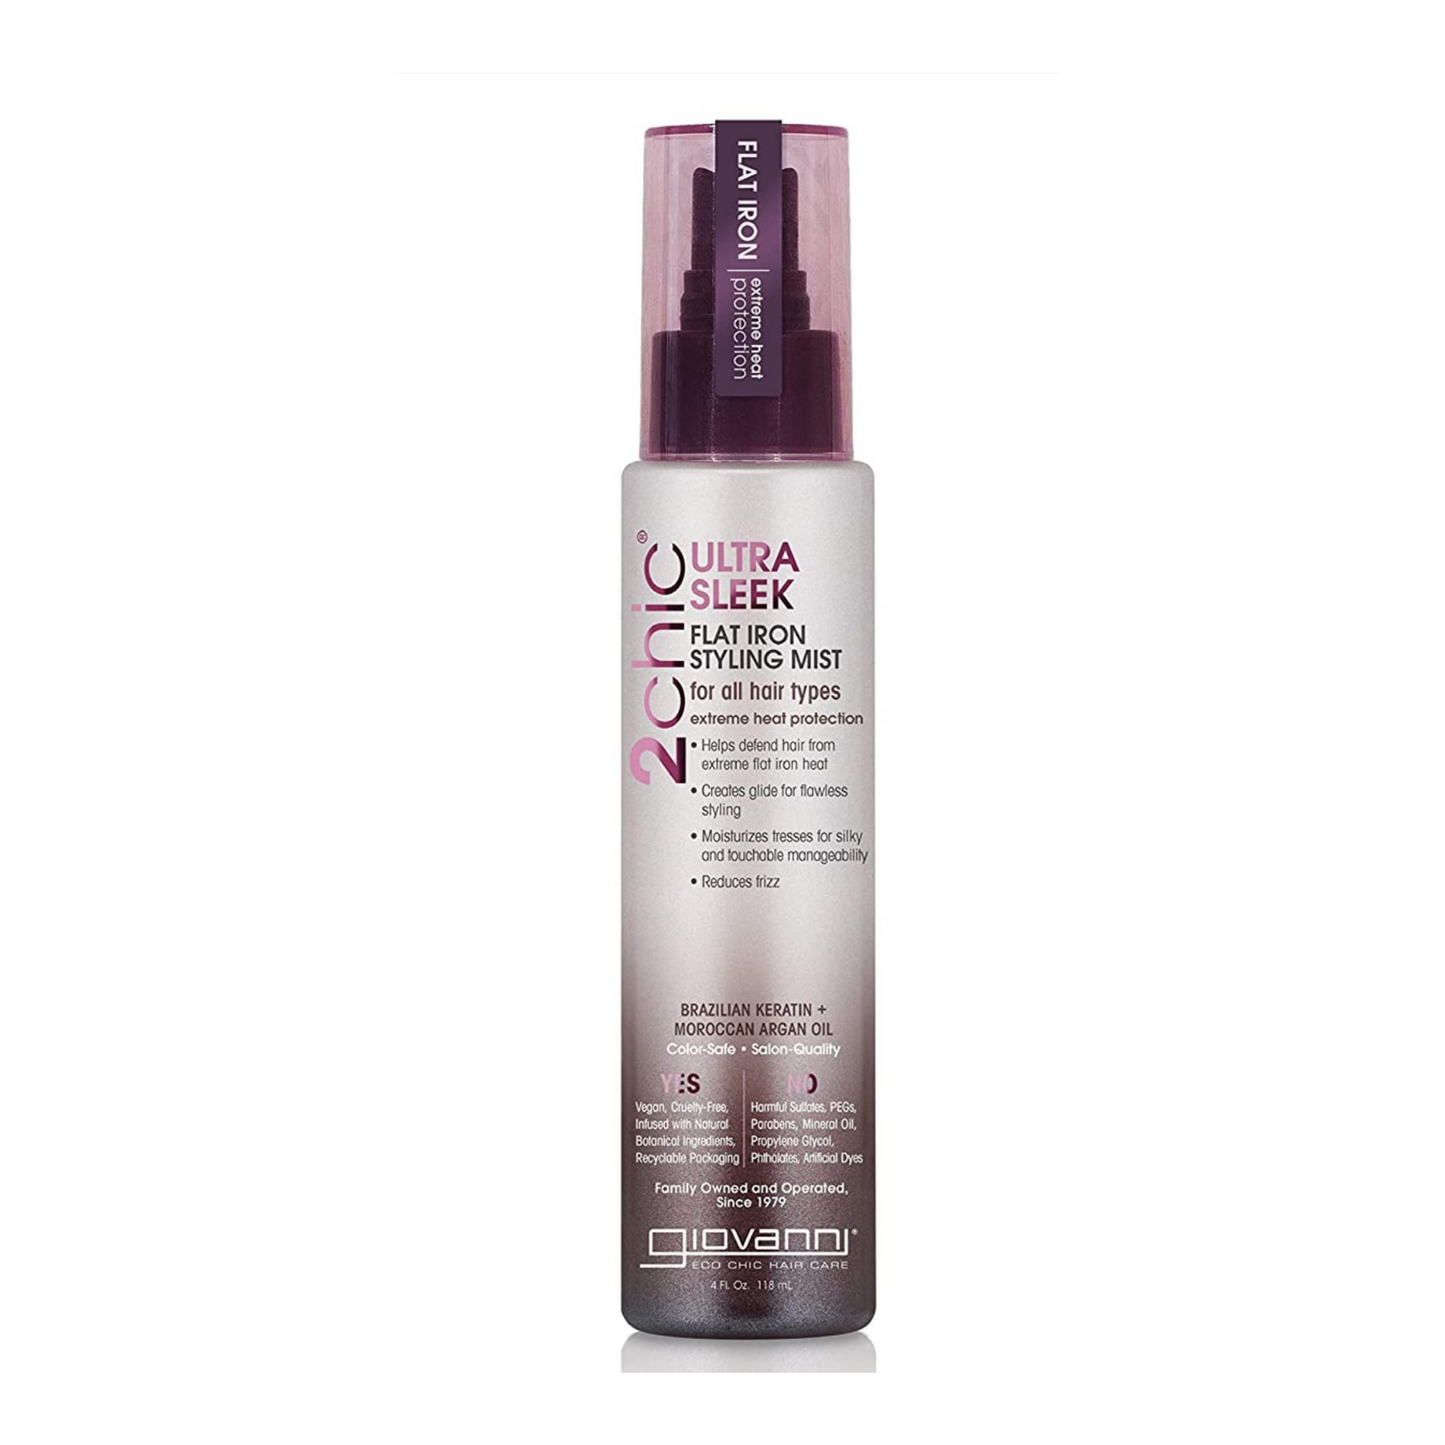 Giovanni 2Chic Ultra Sleek Flat Iron Styling Mist 118ml, For All Hair Types